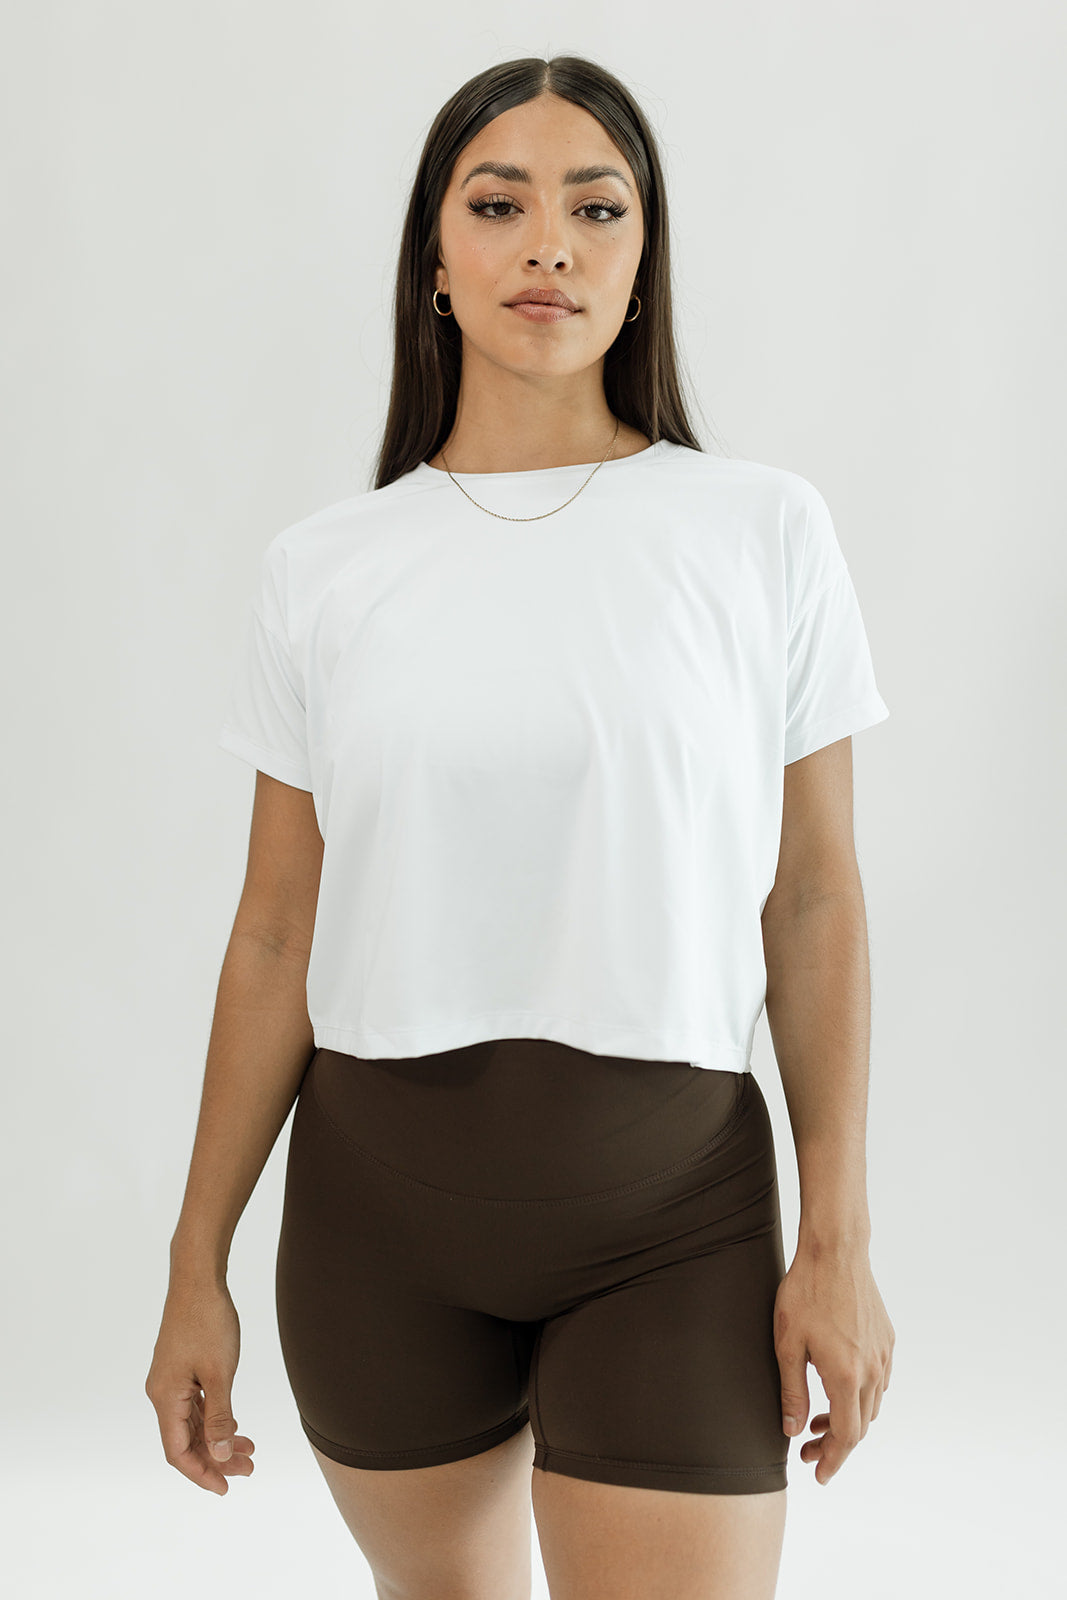 White, lightweight cropped tee shown with cocoa brown biker shorts Volare